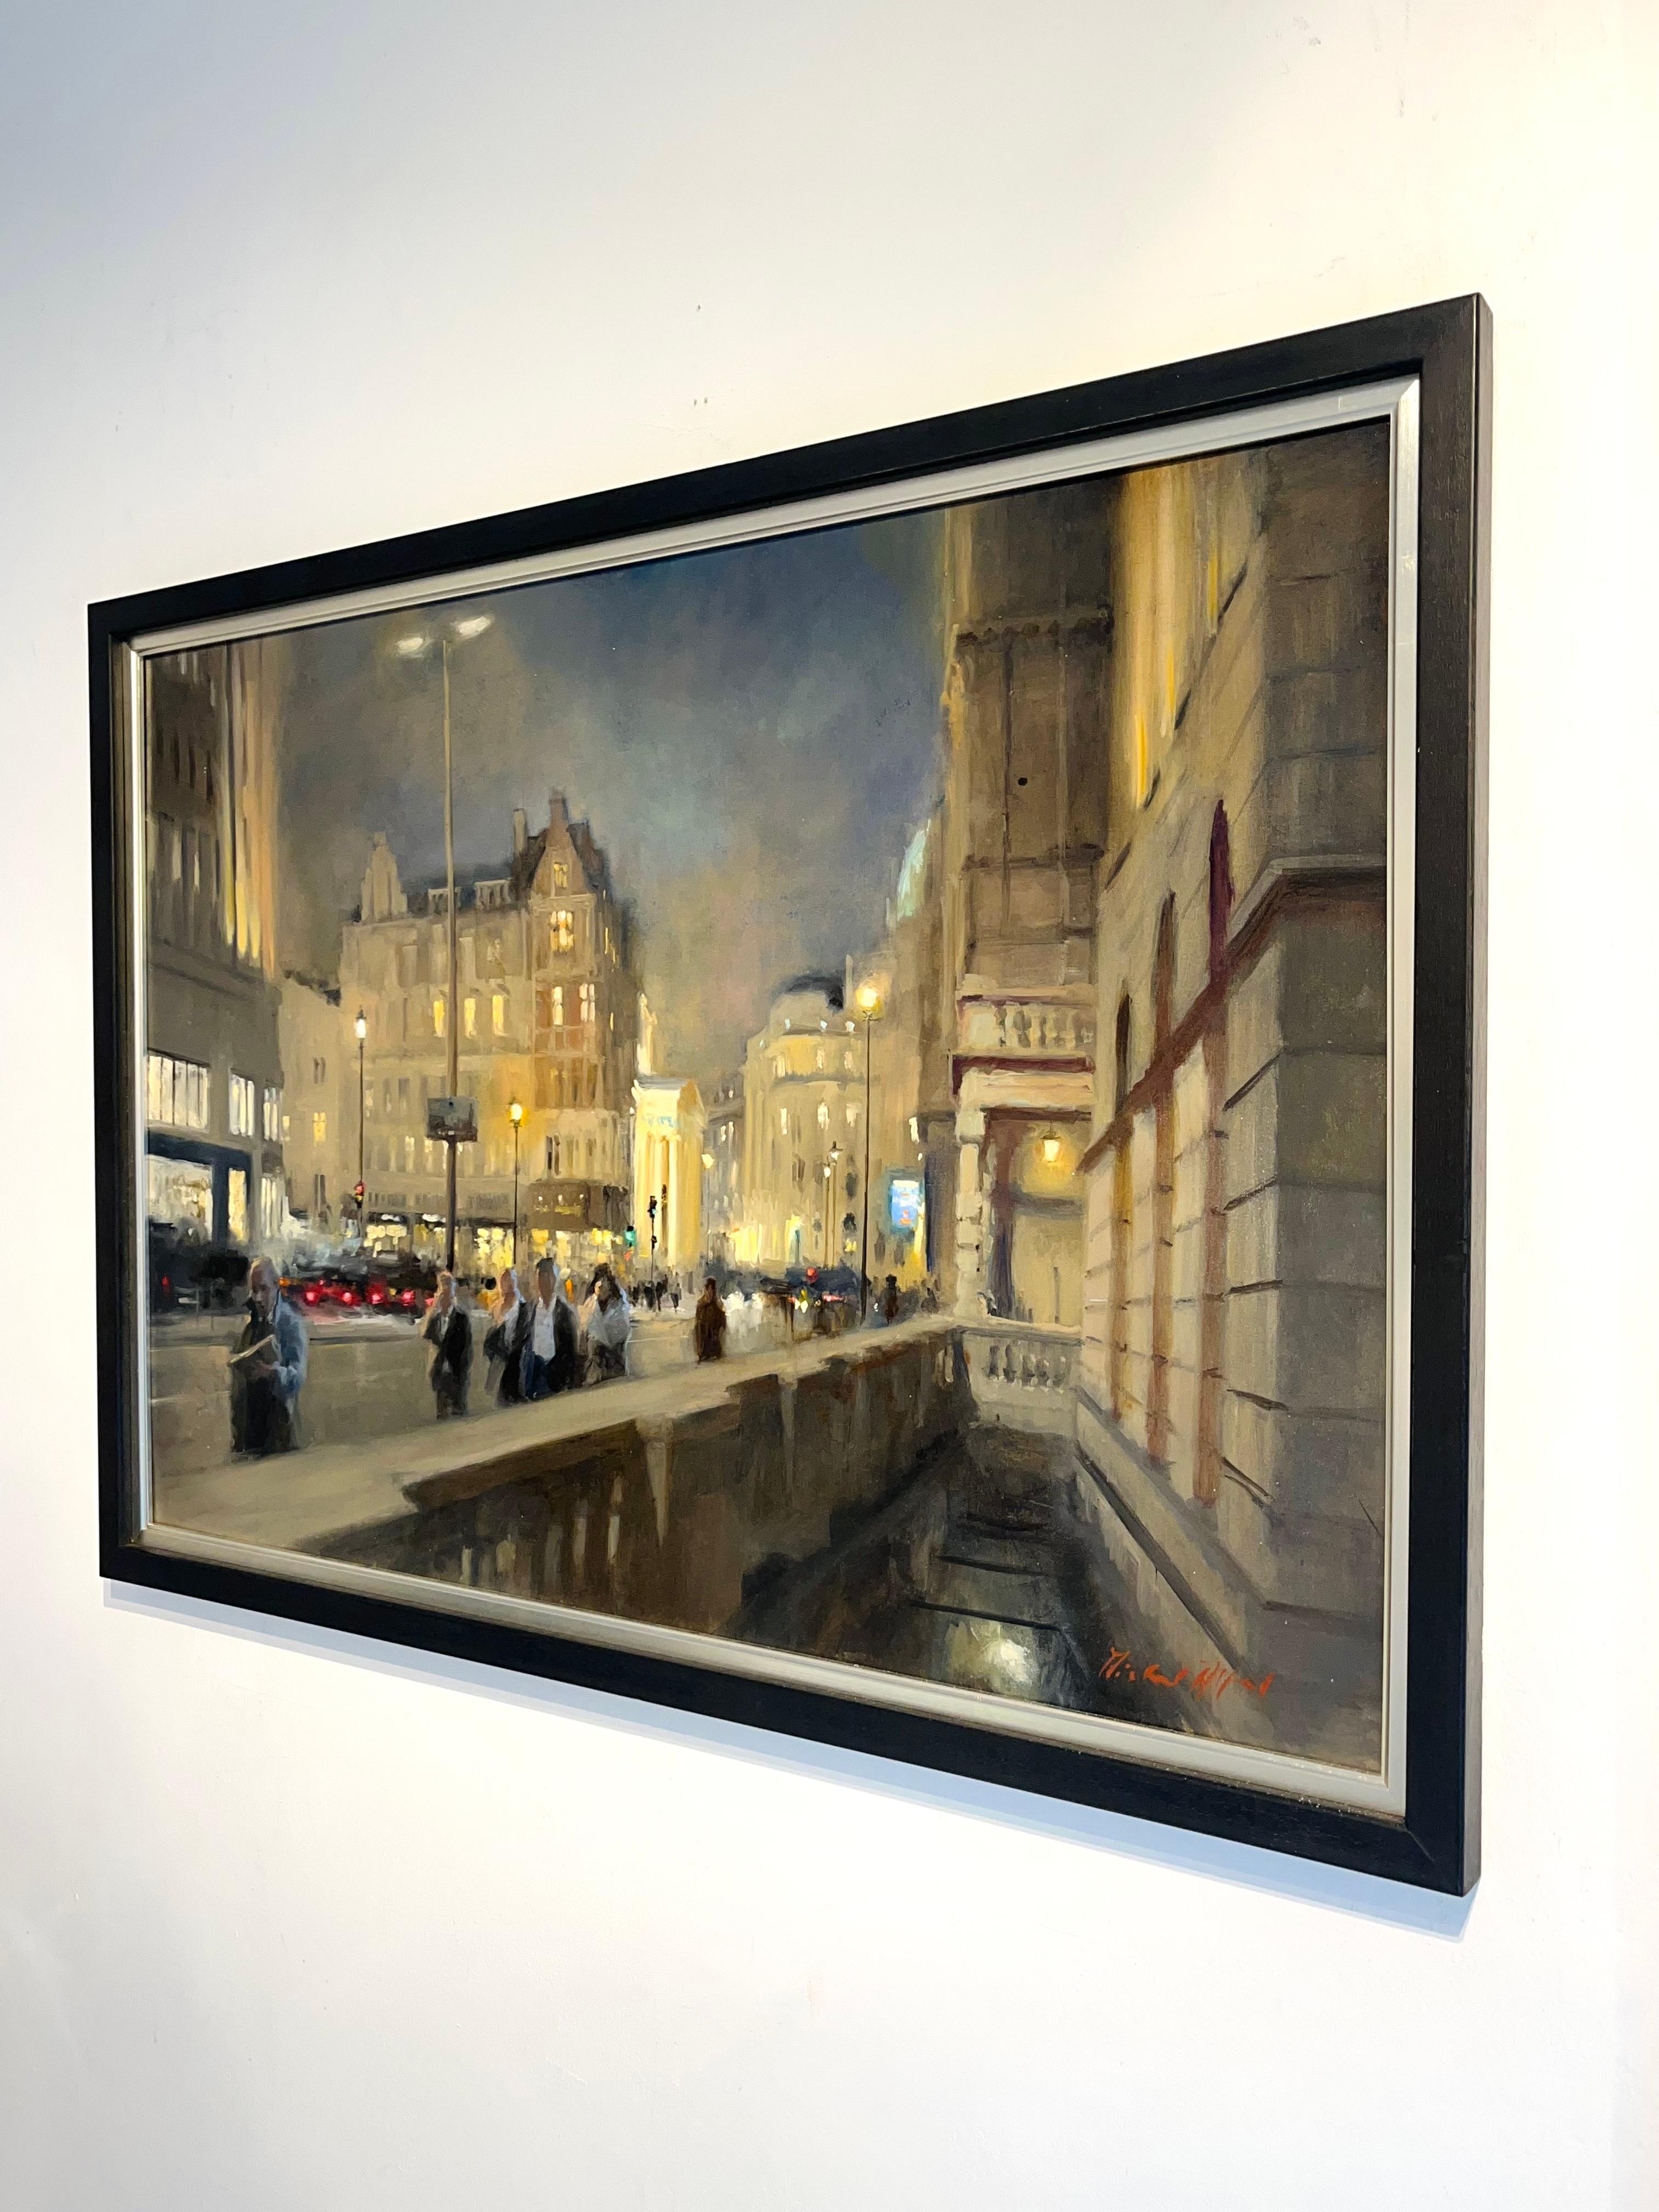 Waterloo Bridge-original impressionism cityscape oil painting-contemporary Art - Impressionist Painting by Michael Alford